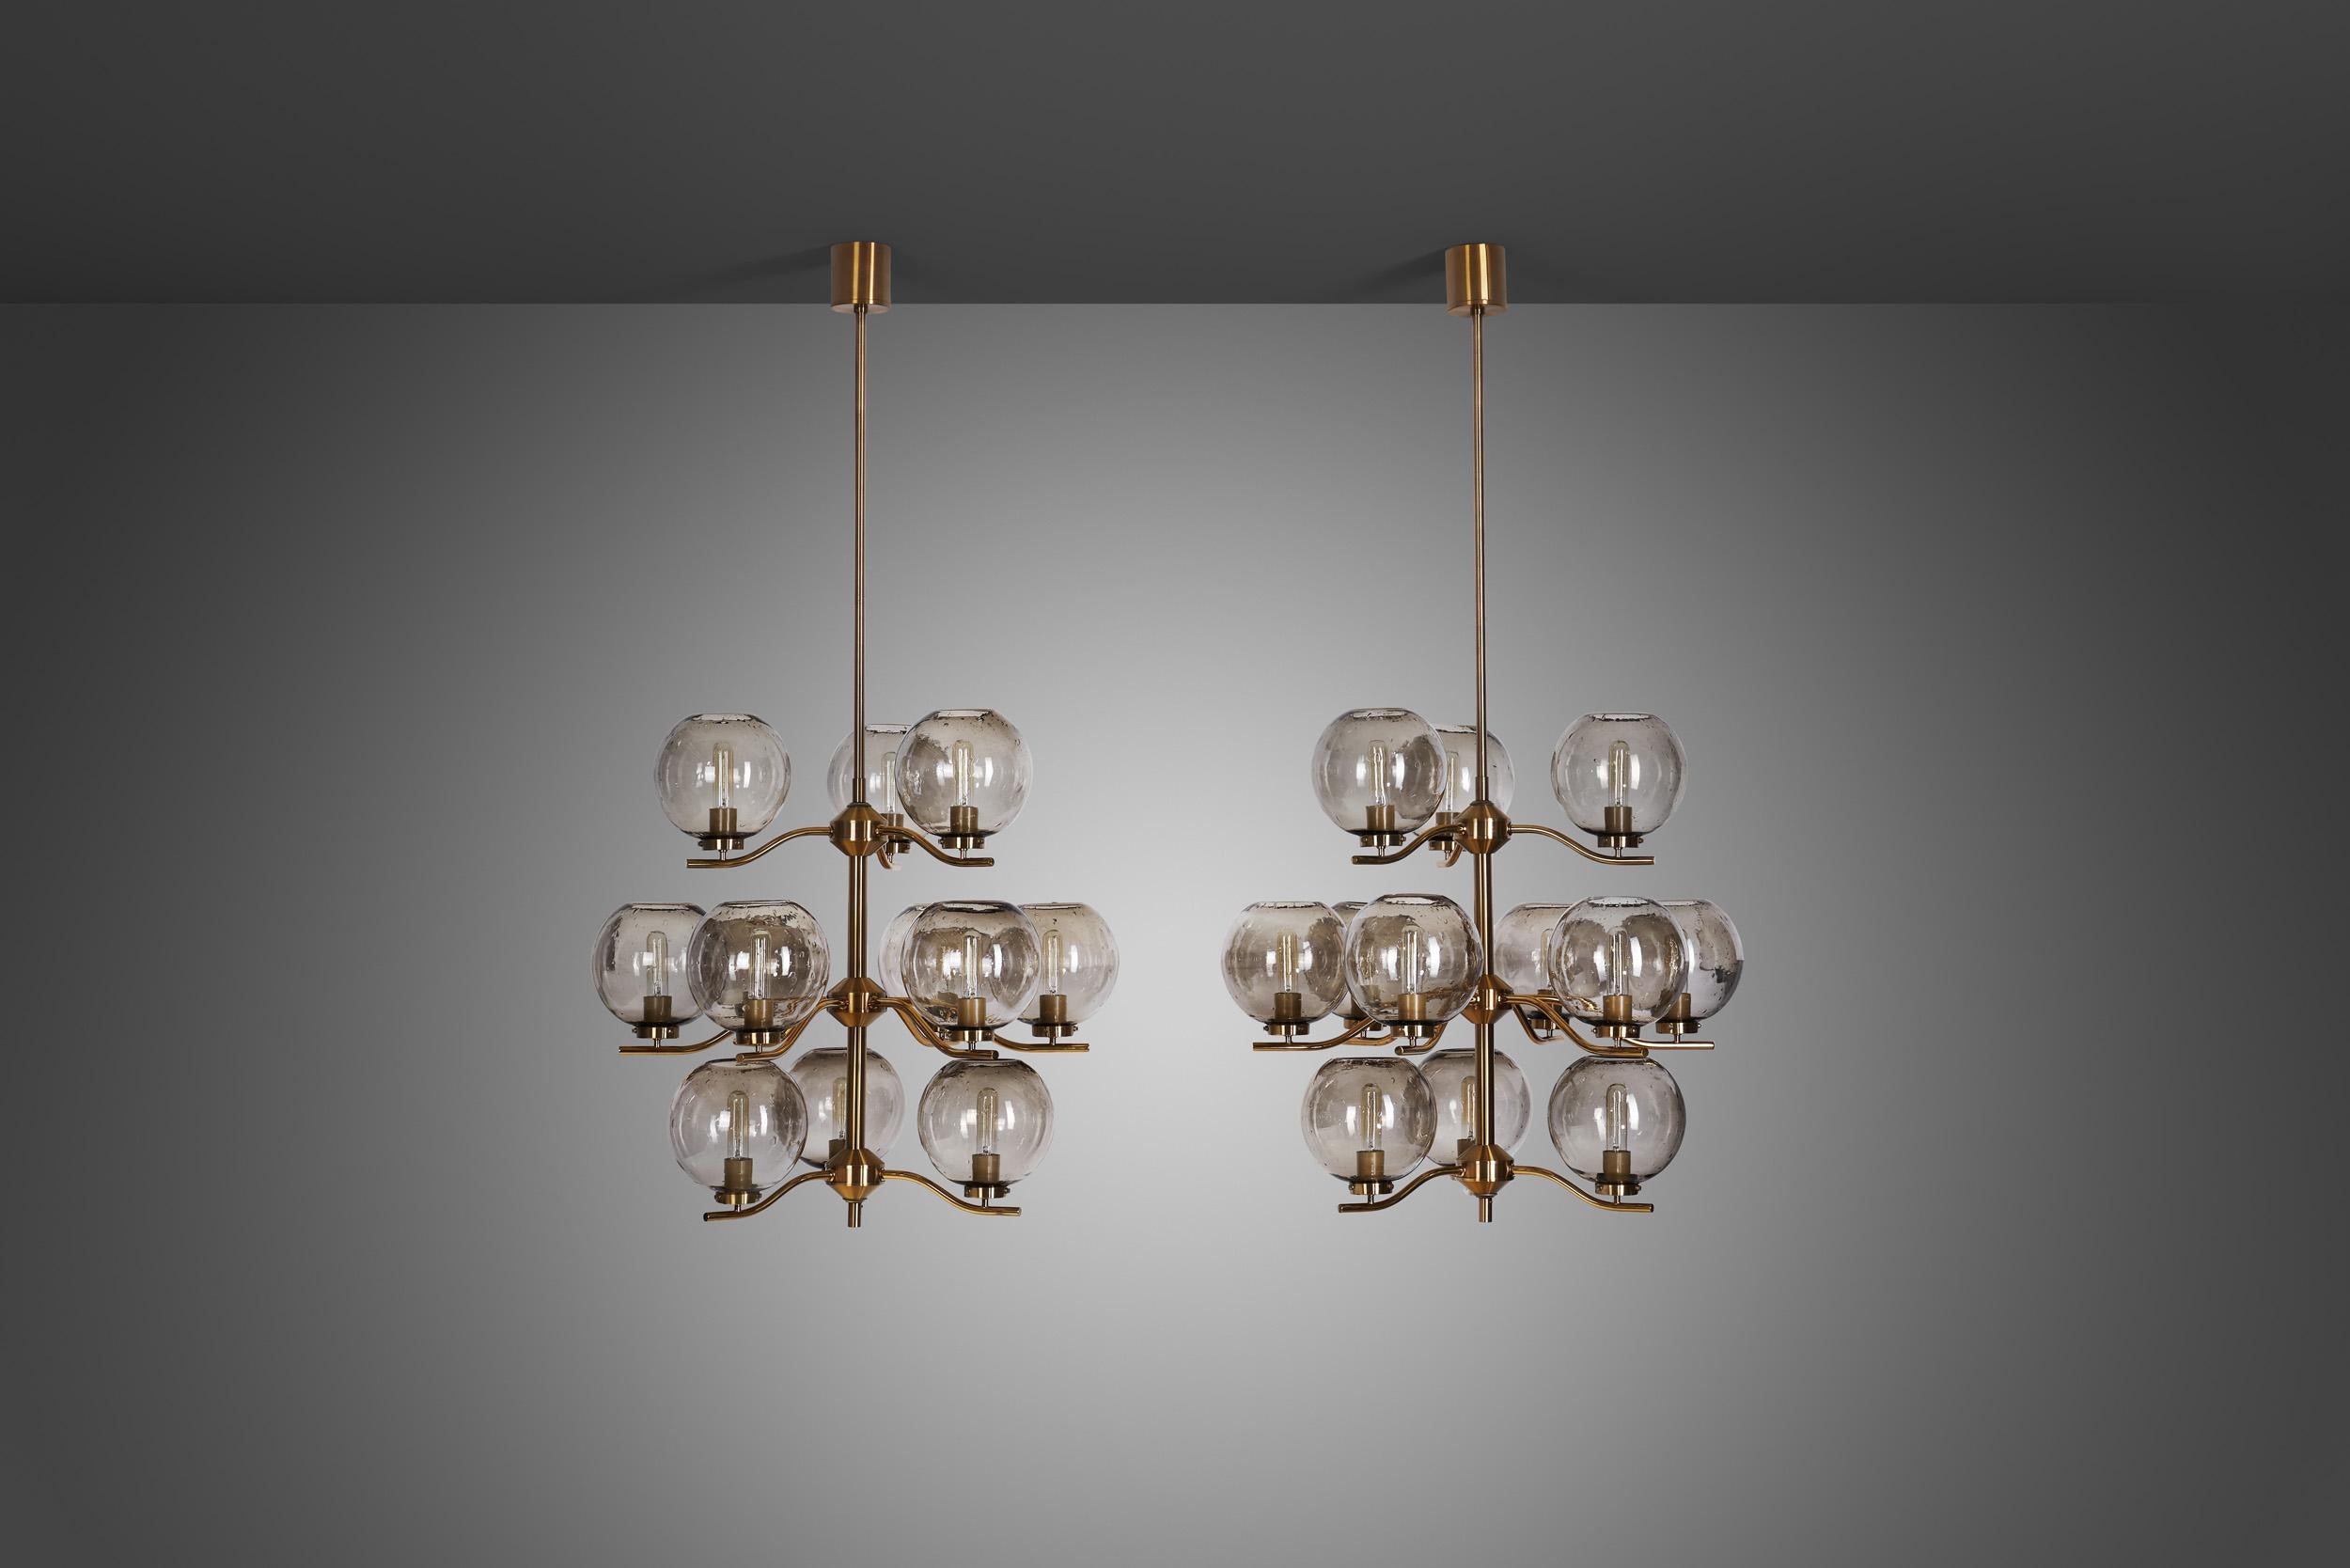 Brass Holger Johansson Chandeliers with 12 Smoked Glass Shades, Sweden 1970s For Sale